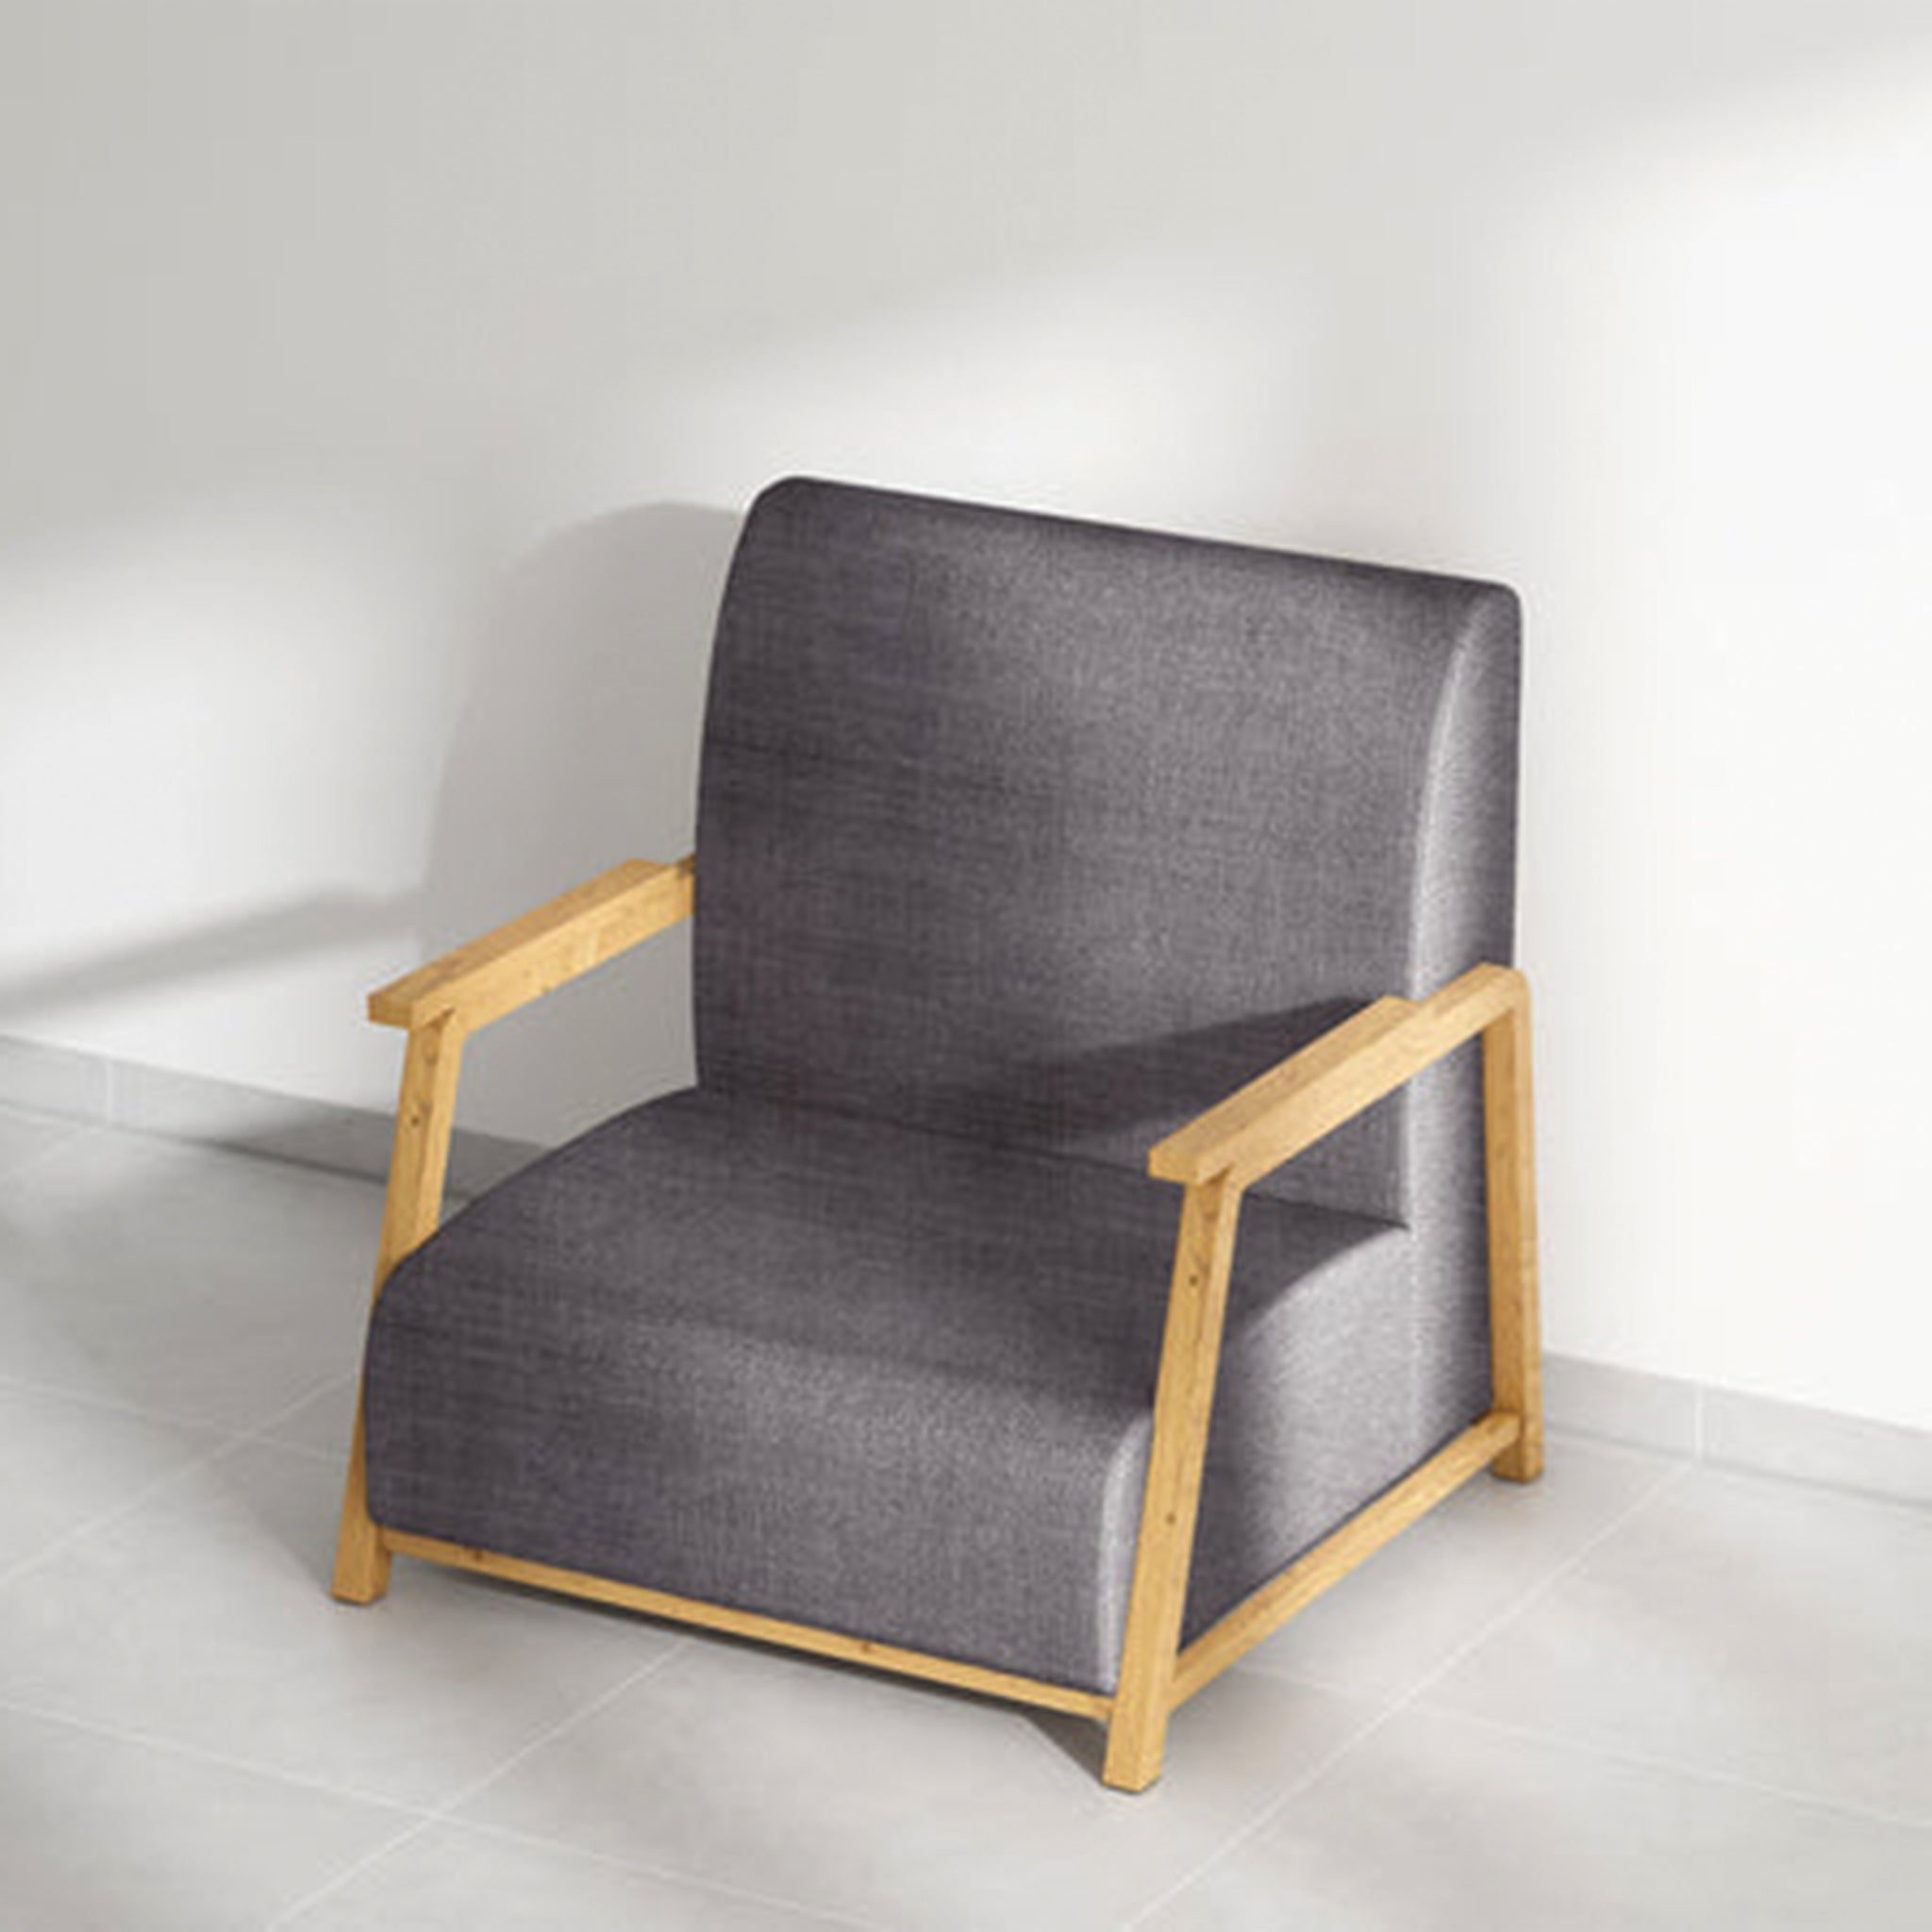 Minimalist design of The Dixon Arm Accent Chair featuring beige upholstery.